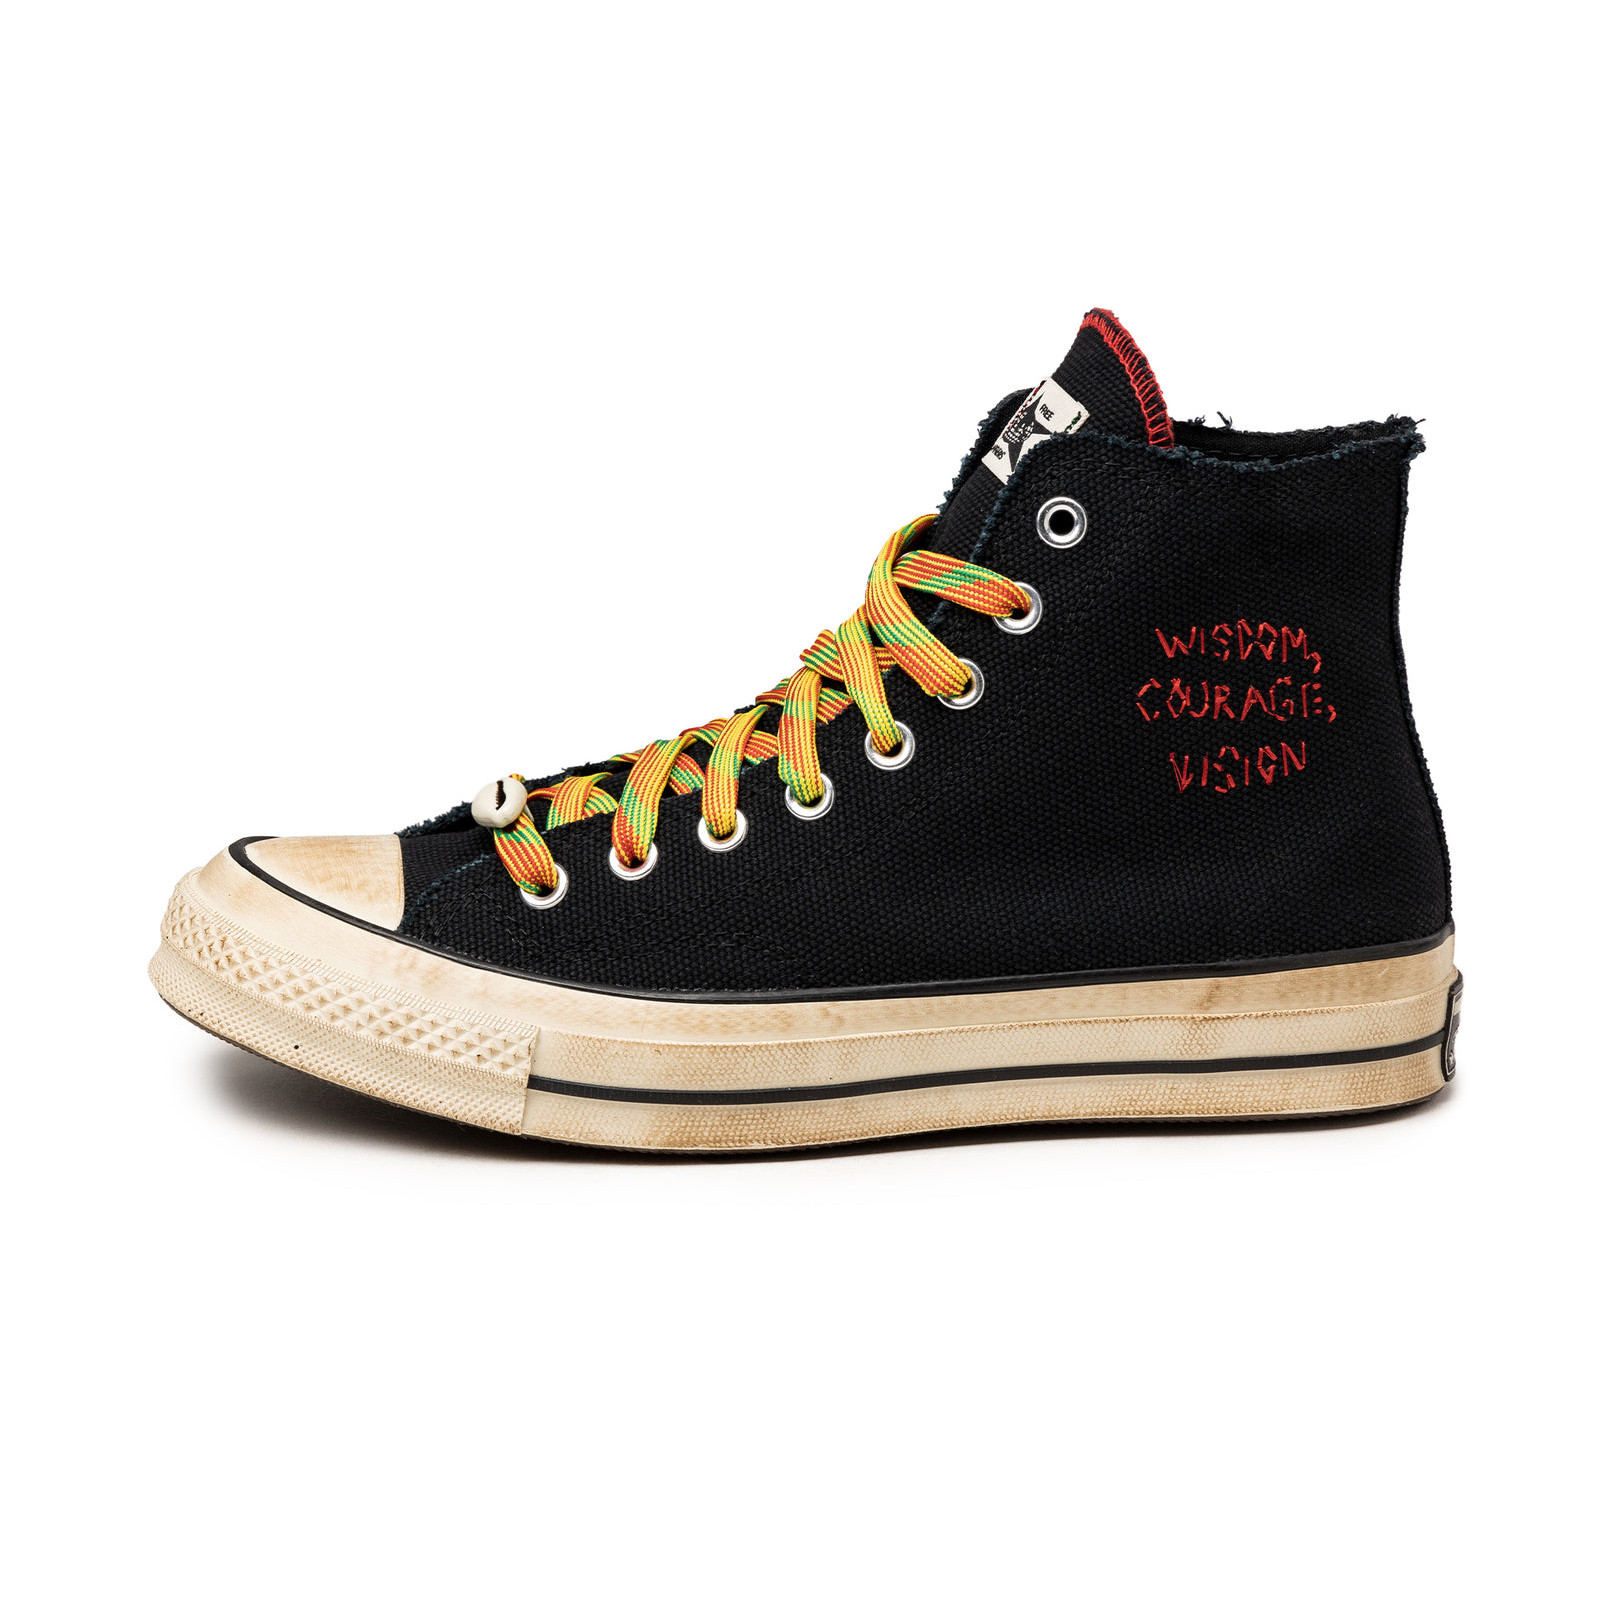 Converse x Barriers
Chuck Taylor All Star 70 Hi
Black / Red